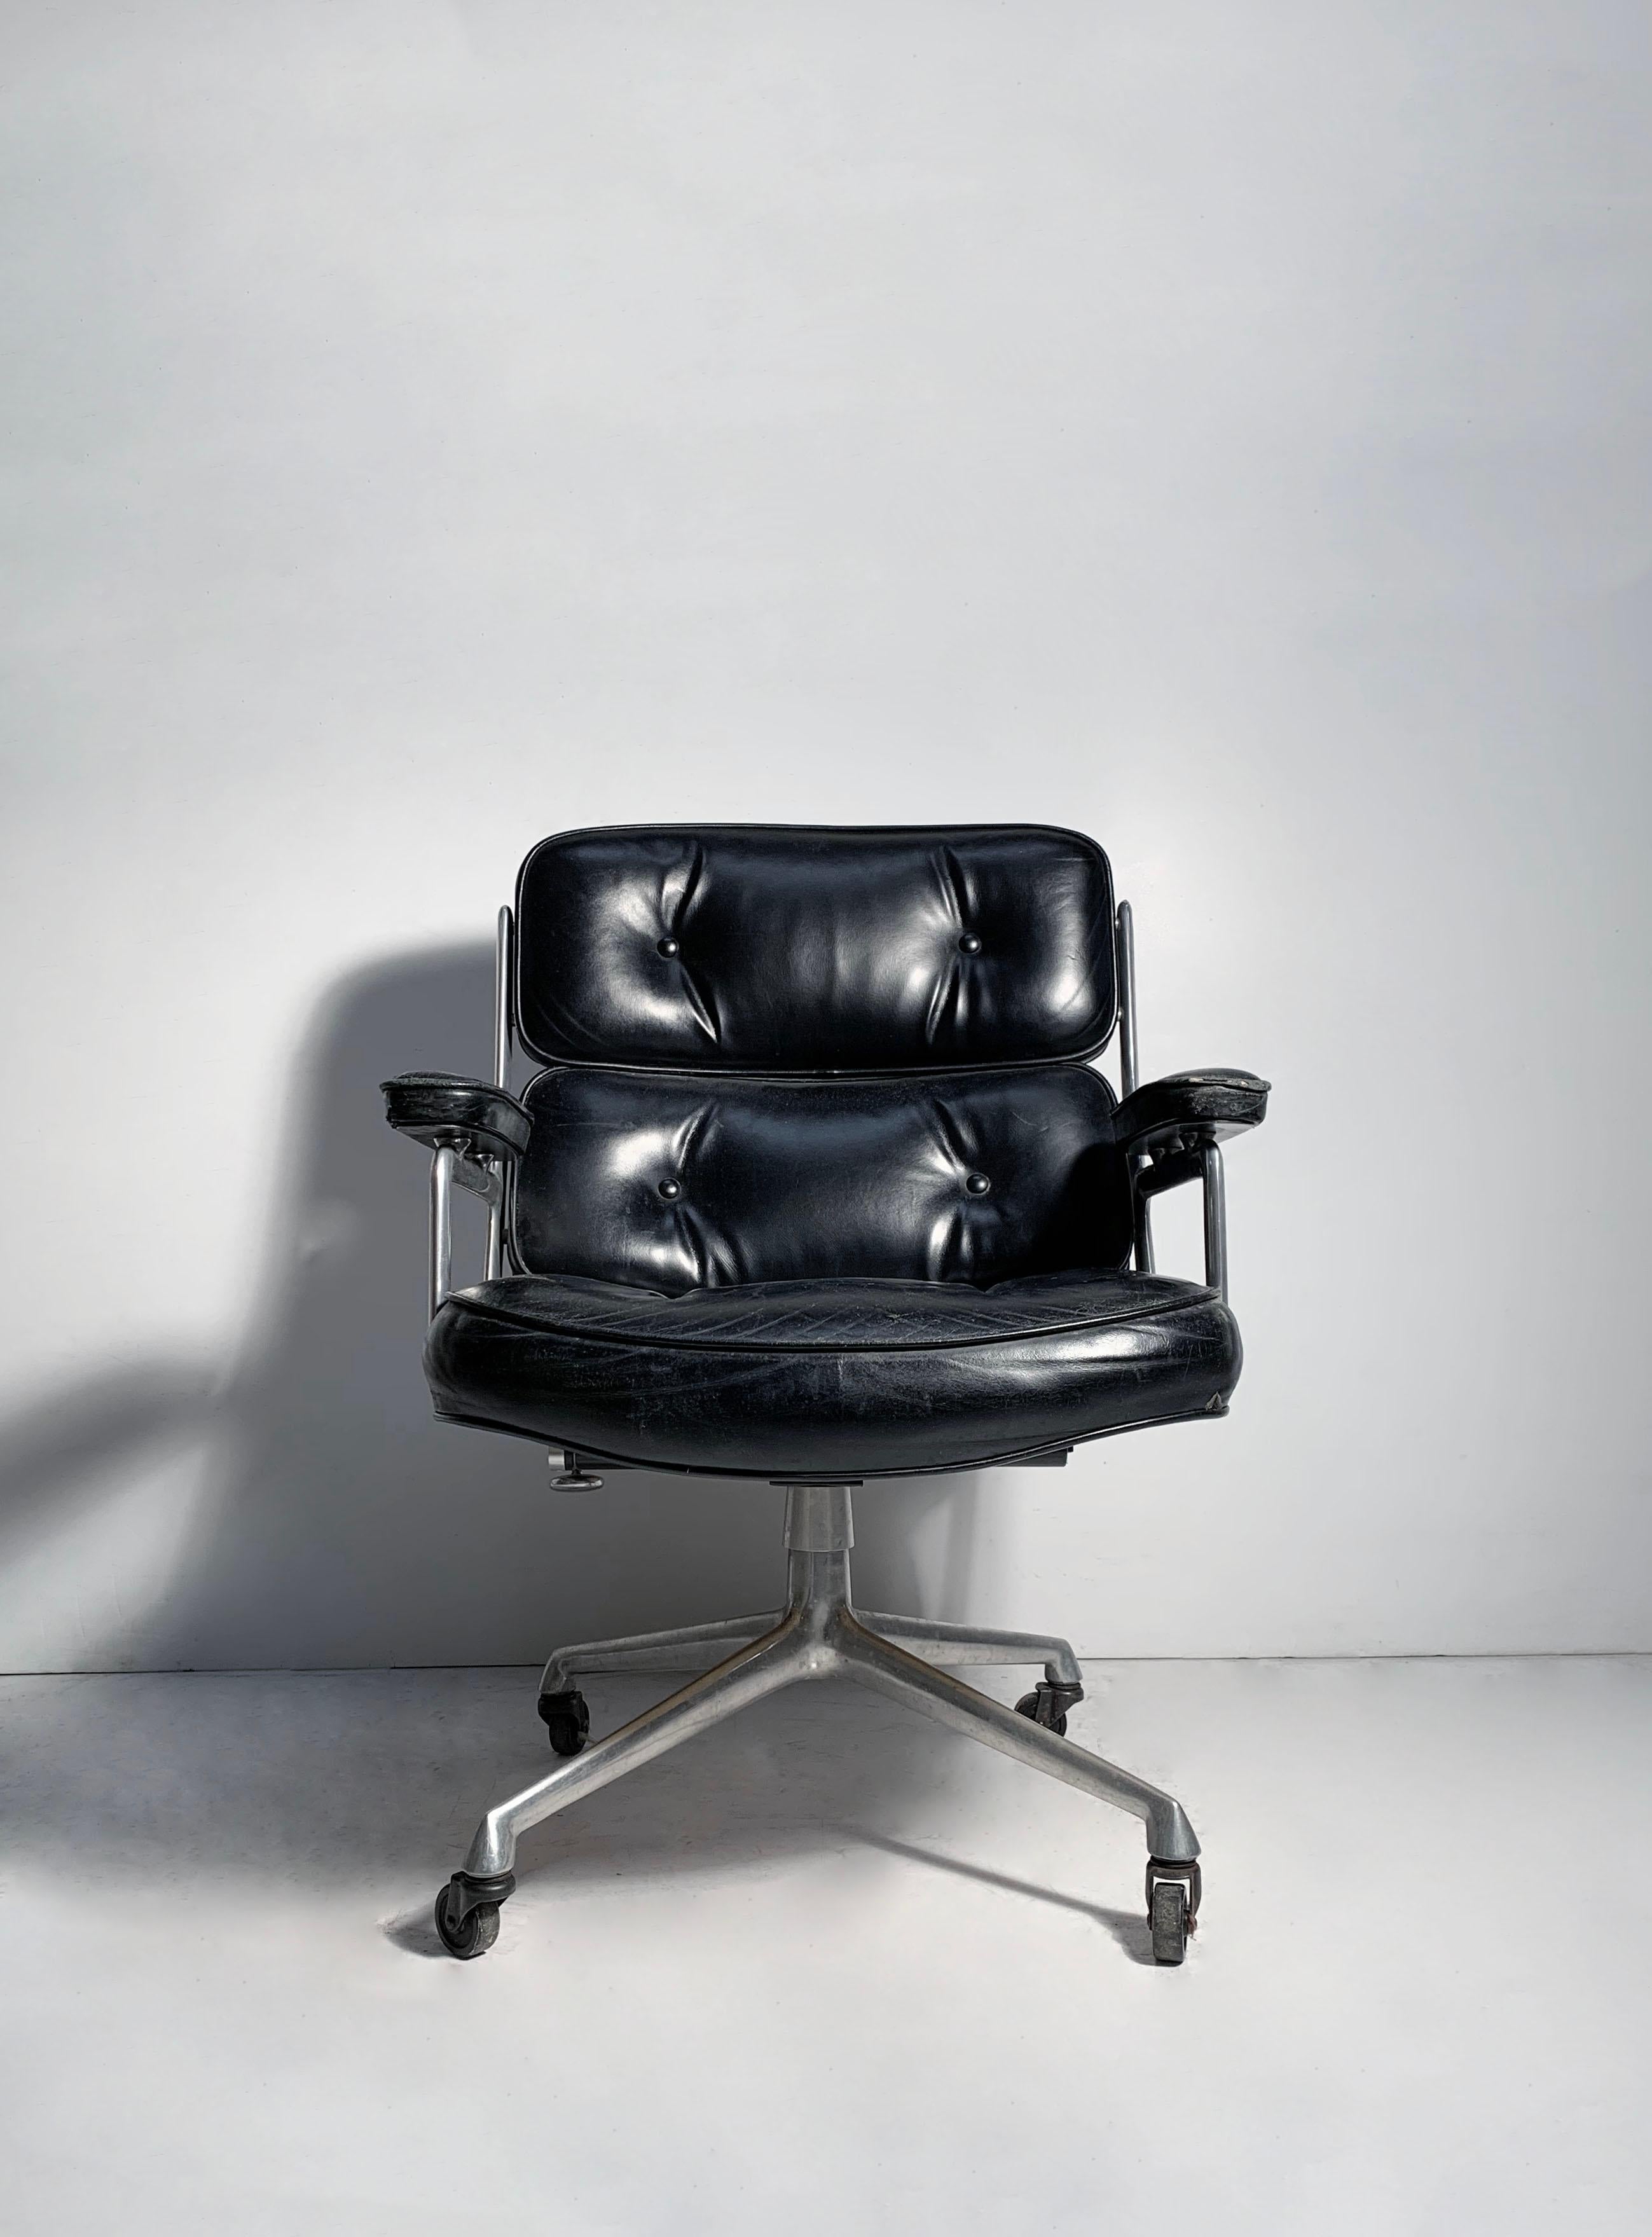 Vintage Time Life Desk Chair ES104 by Charles Eames for Herman Miller. The appears to be a nice early example of the design.
Will double check the dimensions of the chair.

Wear to the original leather as shown. Either leather restoration should